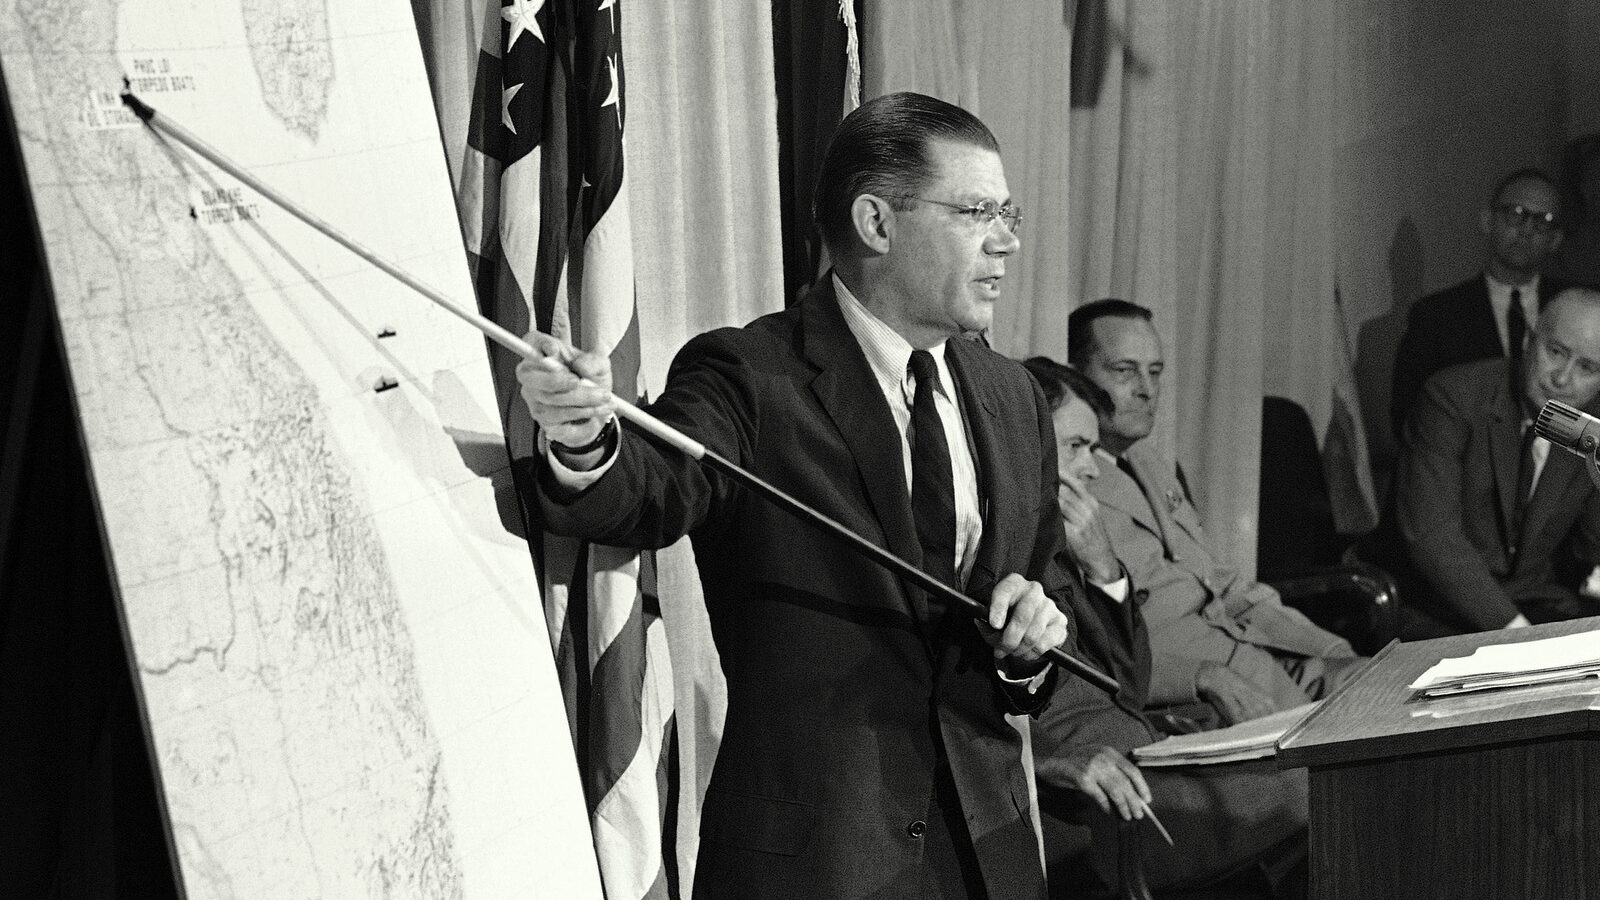 Sec. of Defense Robert McNamara indicates on a map where U.S. Navy aircraft made strikes at North Vietnamese PT boats and their shore bases in retaliation for the two attacks on American craft in the Gulf of Tonkin at a Pentagon news briefing, Aug. 5, 1964, Washington, D.C. The account came within hours of an announcement by Pres. Lyndon B. Johnson of the decision to hit back hard in reply to the attacks. (AP Photo)